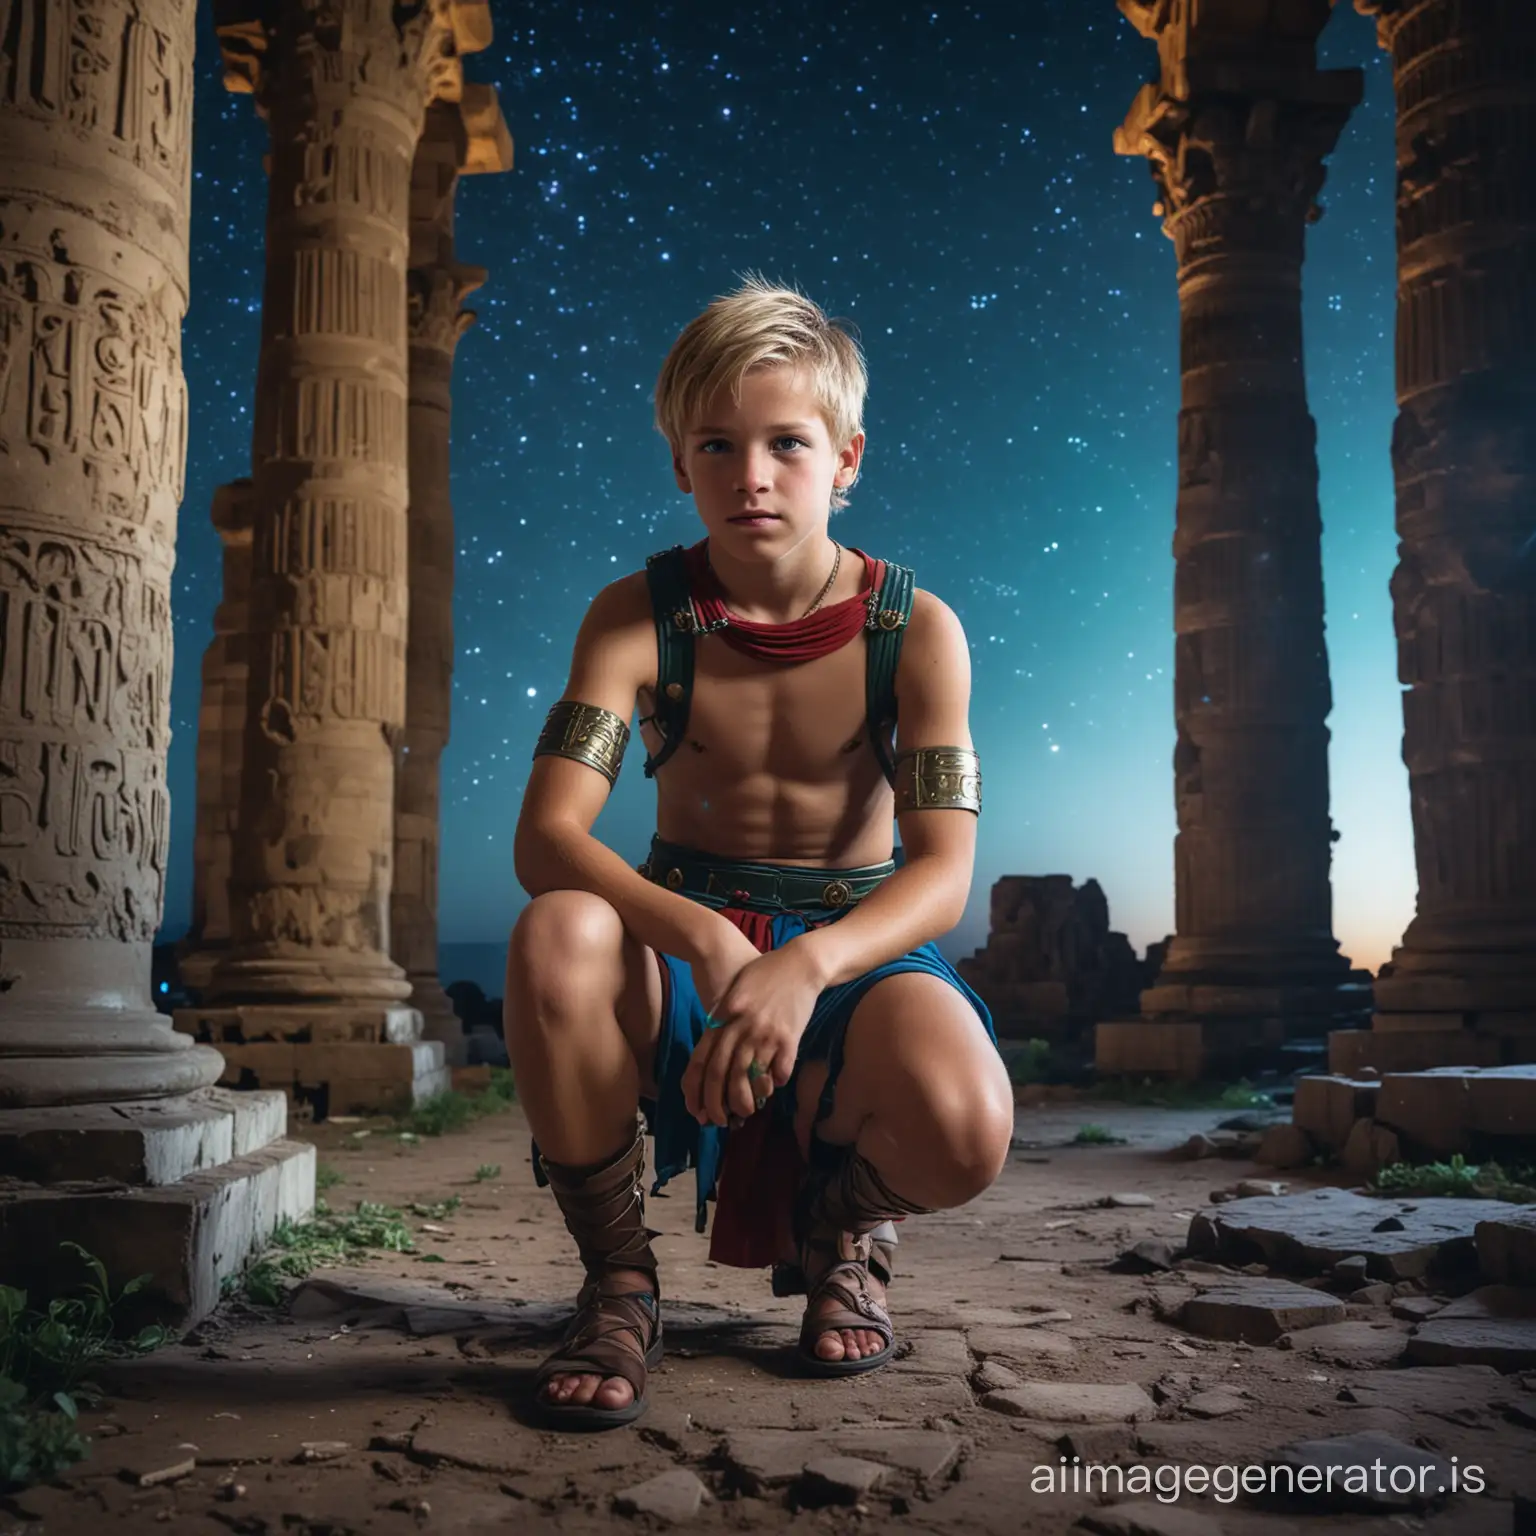 Muscular sweaty young caucasian blond boy crouching.
Dressed as a Roman soldier, shirtless. In the ruins of an Egyptian temple. At night. With blue and green neon colors ambient. The sky is full of stars with a huge galaxy.